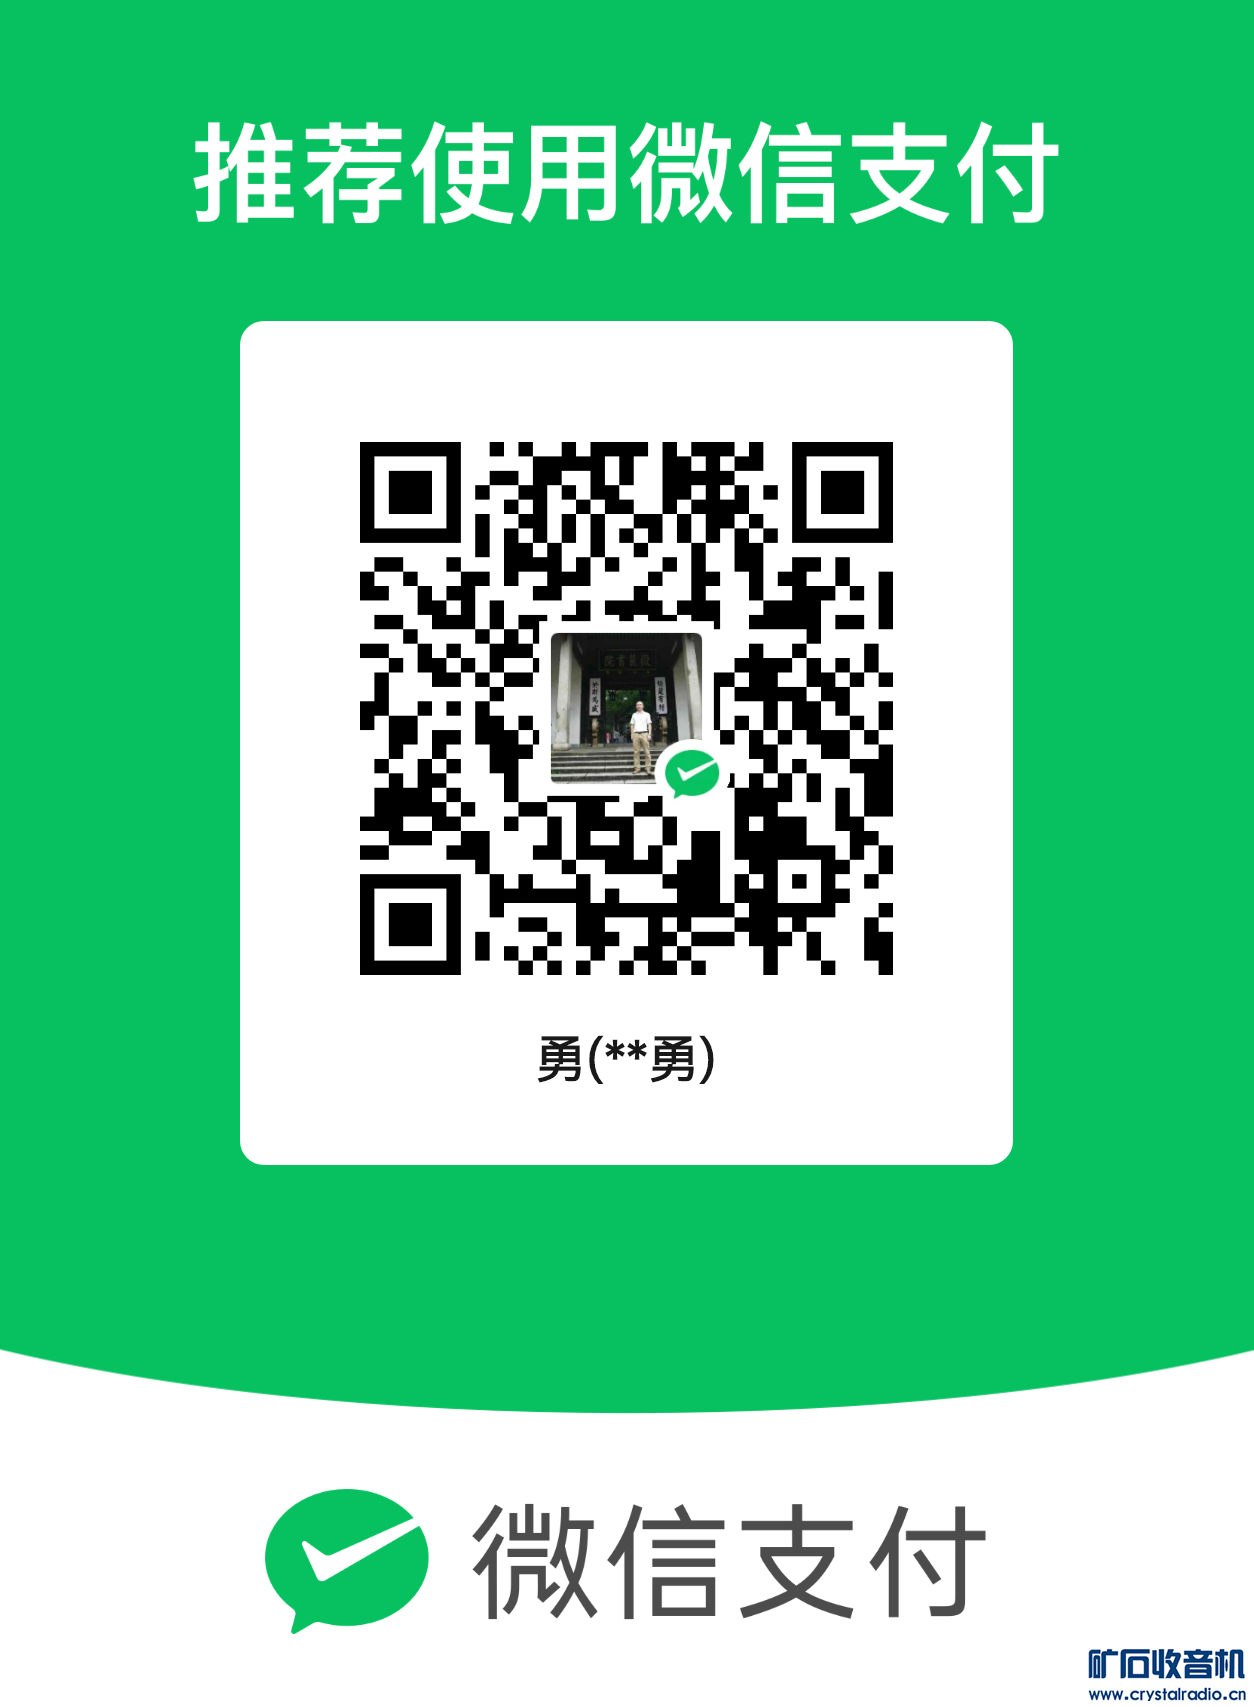 mm_facetoface_collect_qrcode_1710430886426.png